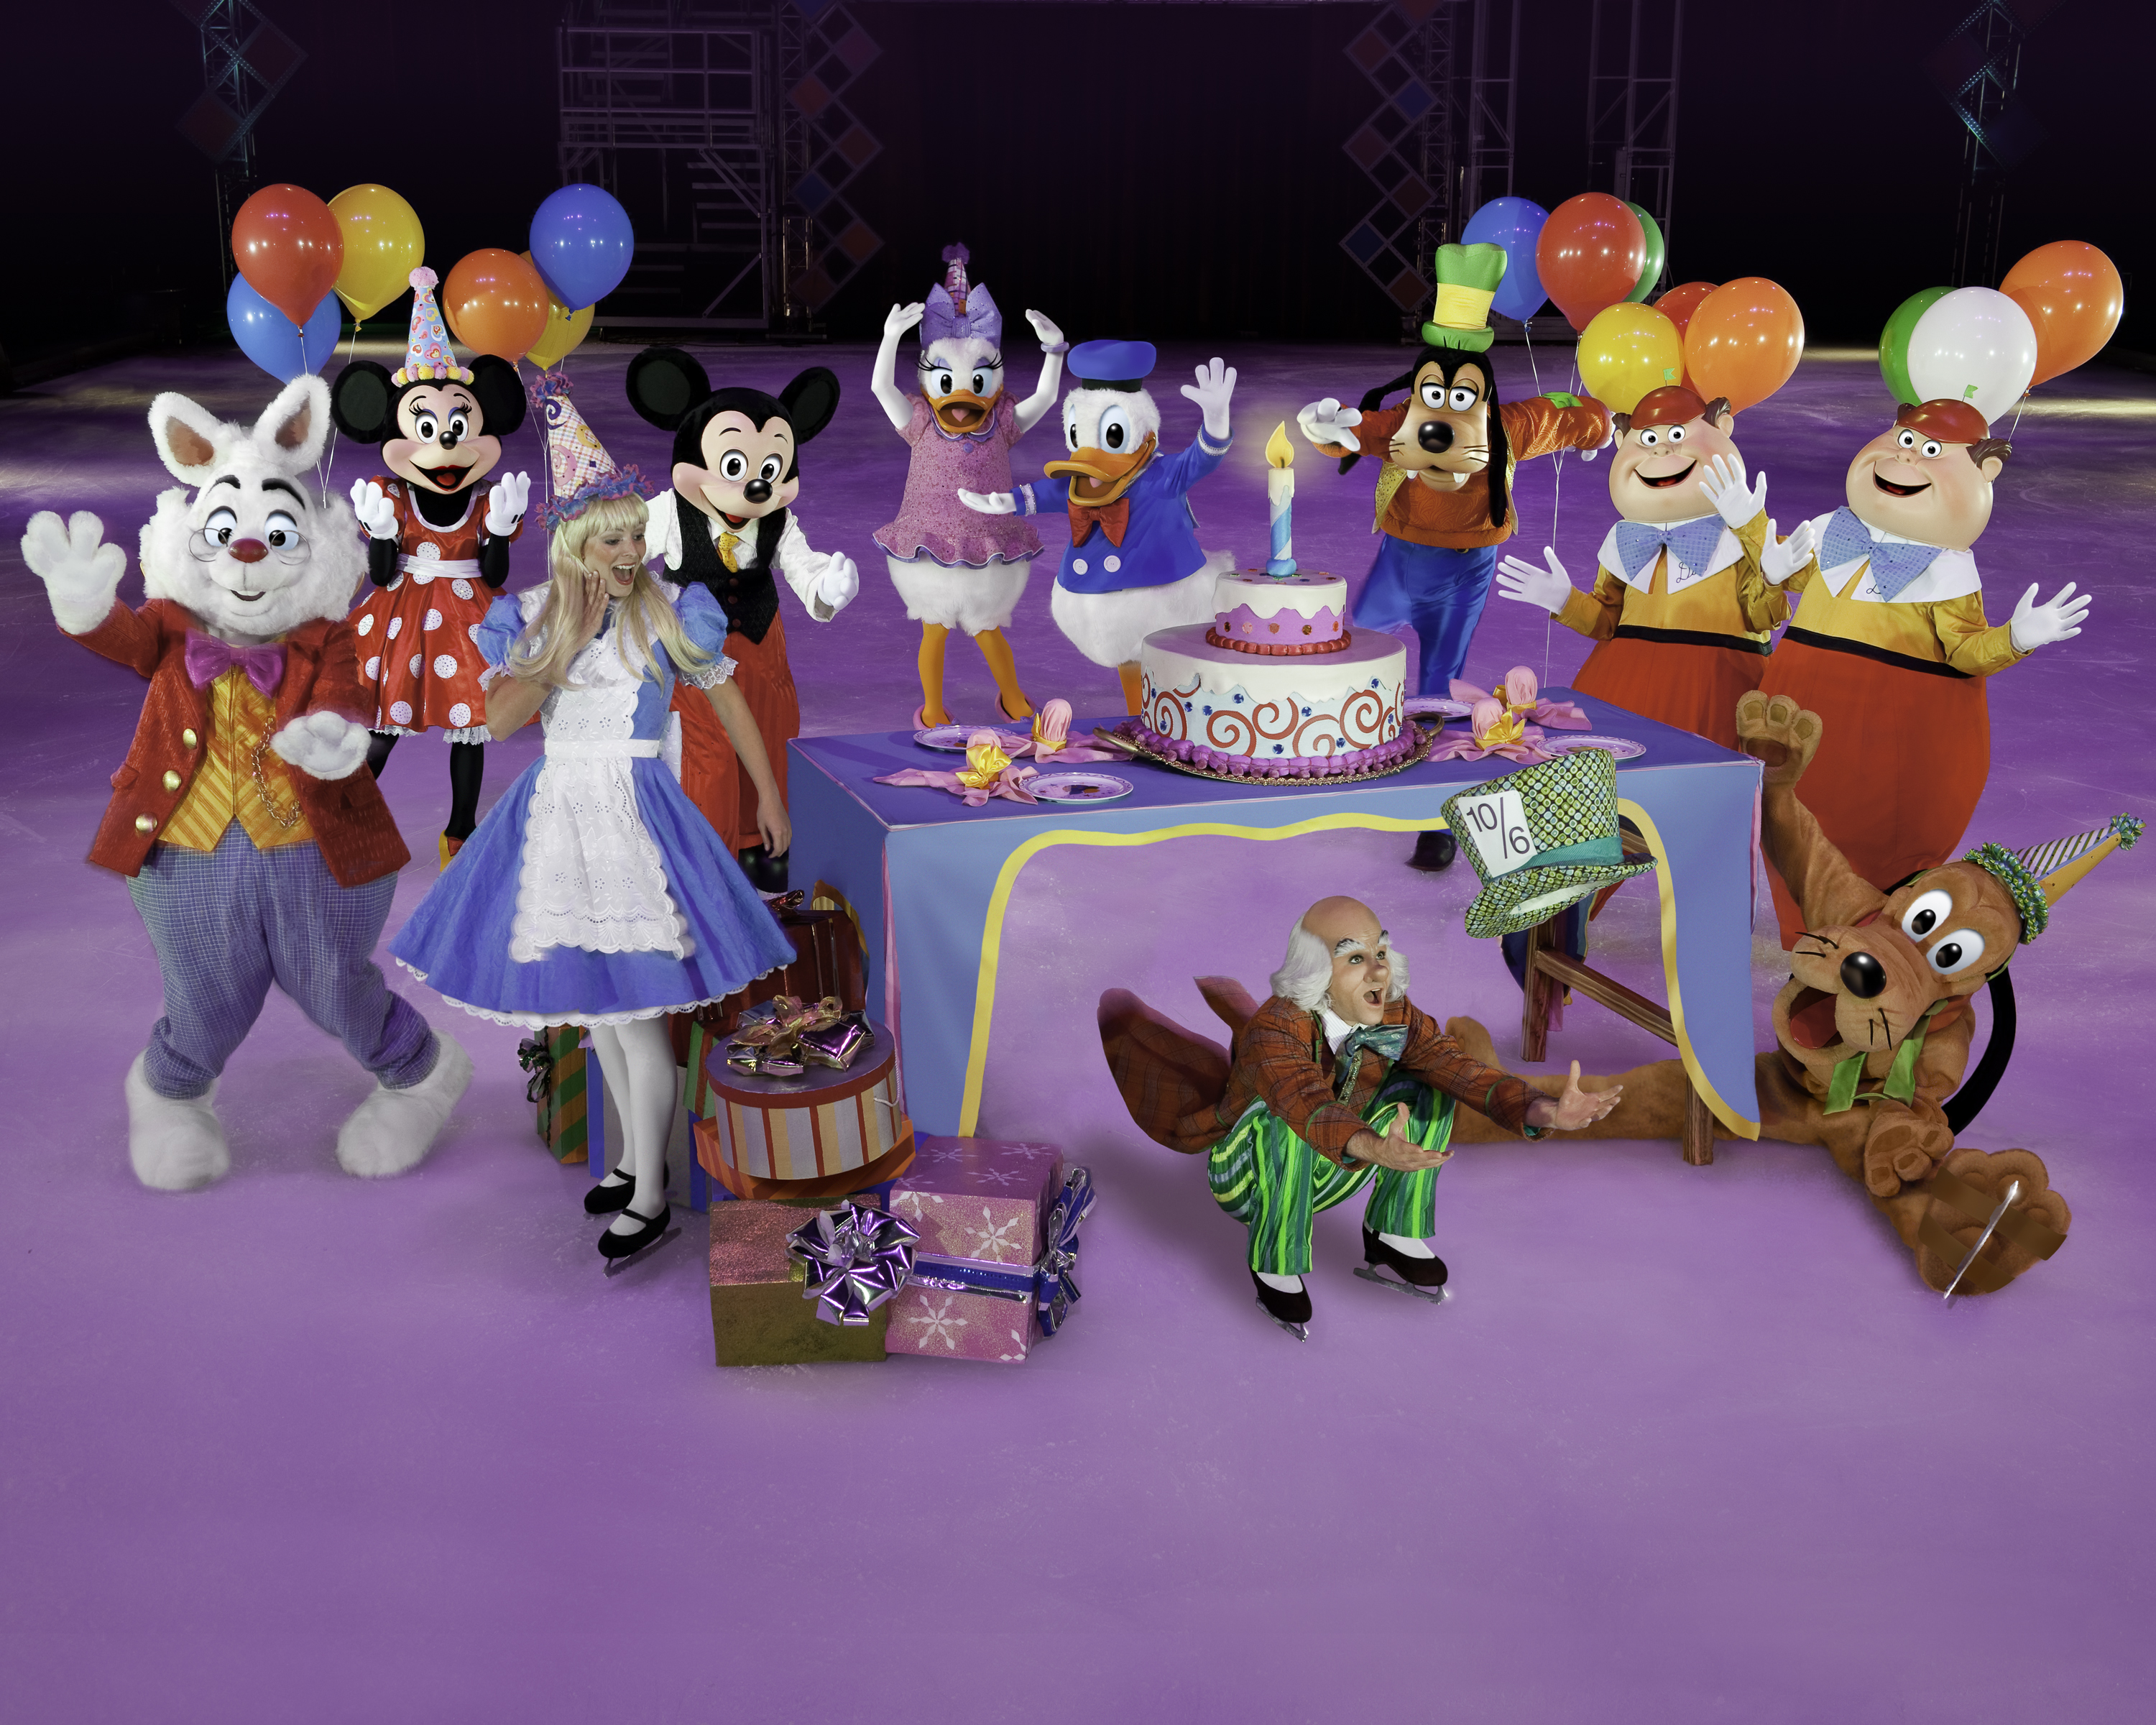 Disney On Ice Lets Party at the Birmingham LG Arena in February 2013